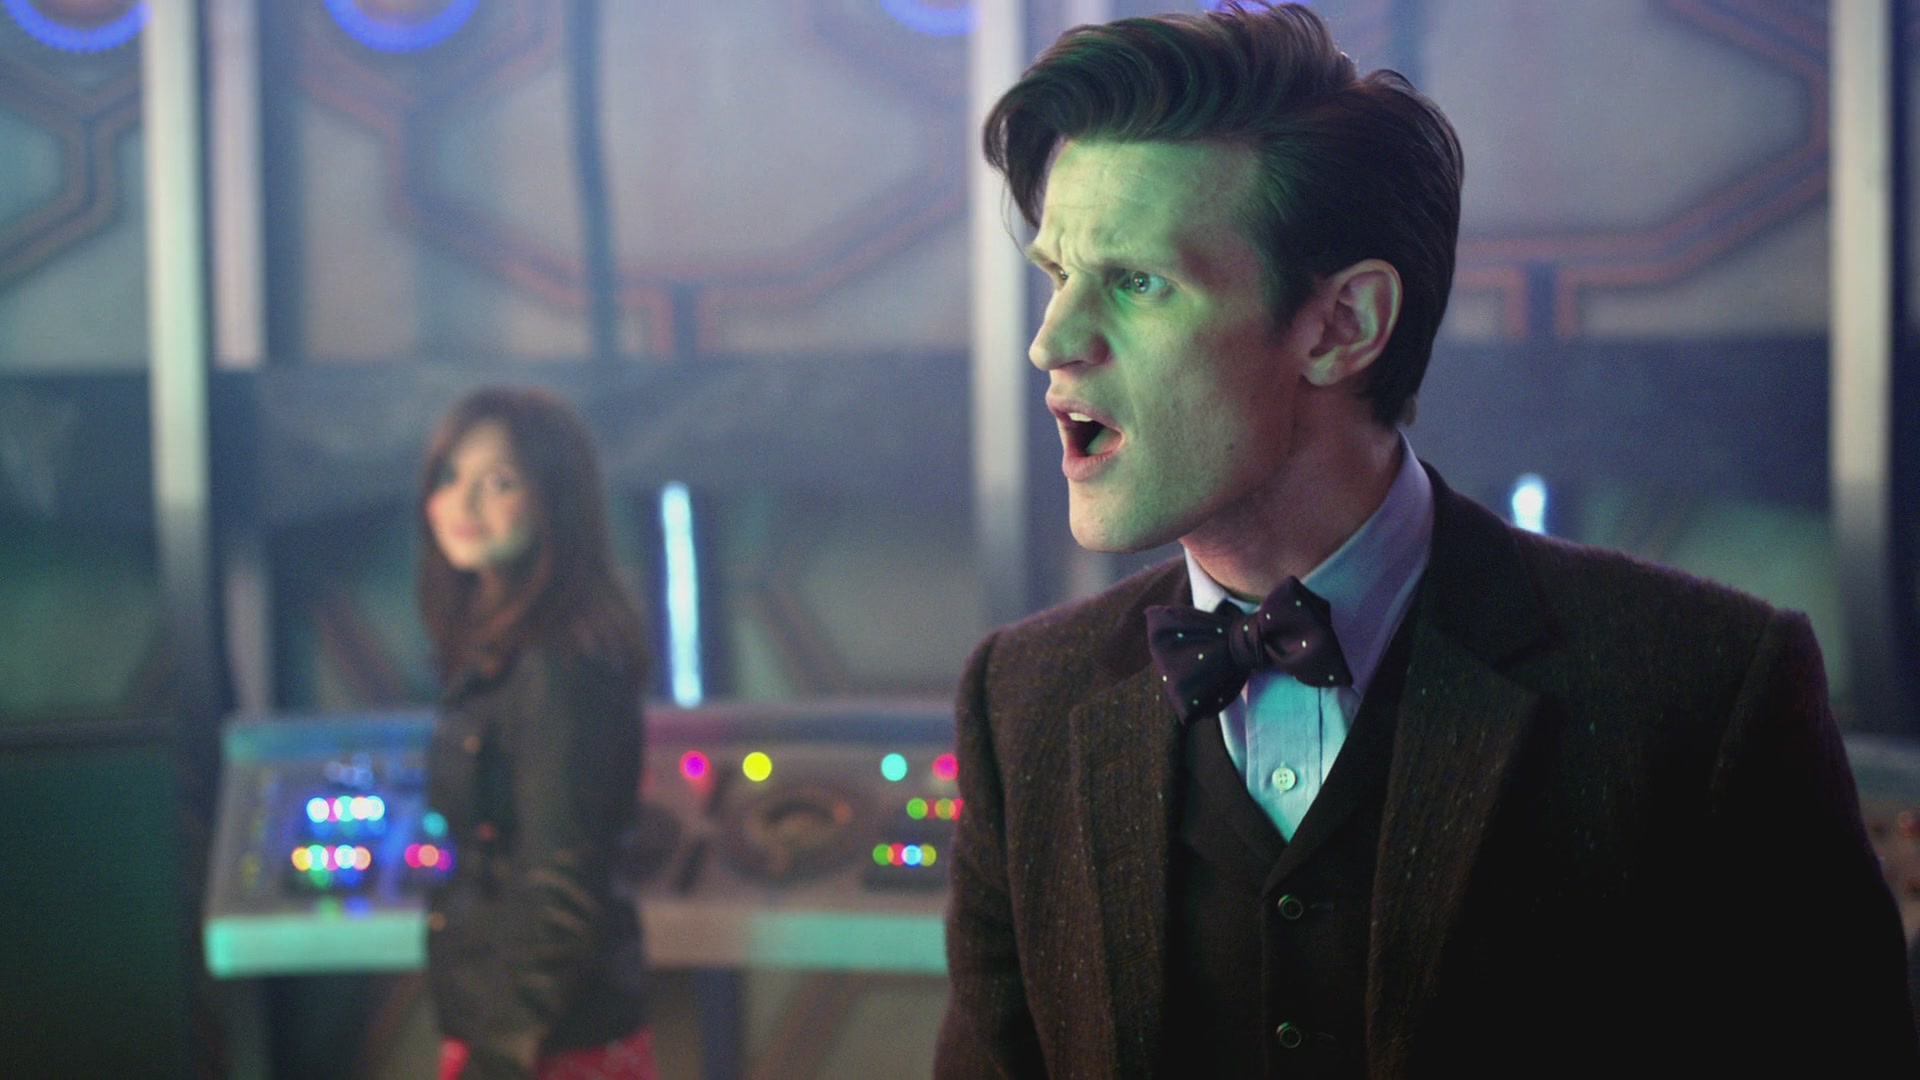 DayOfTheDoctor-Caps-0898.jpg